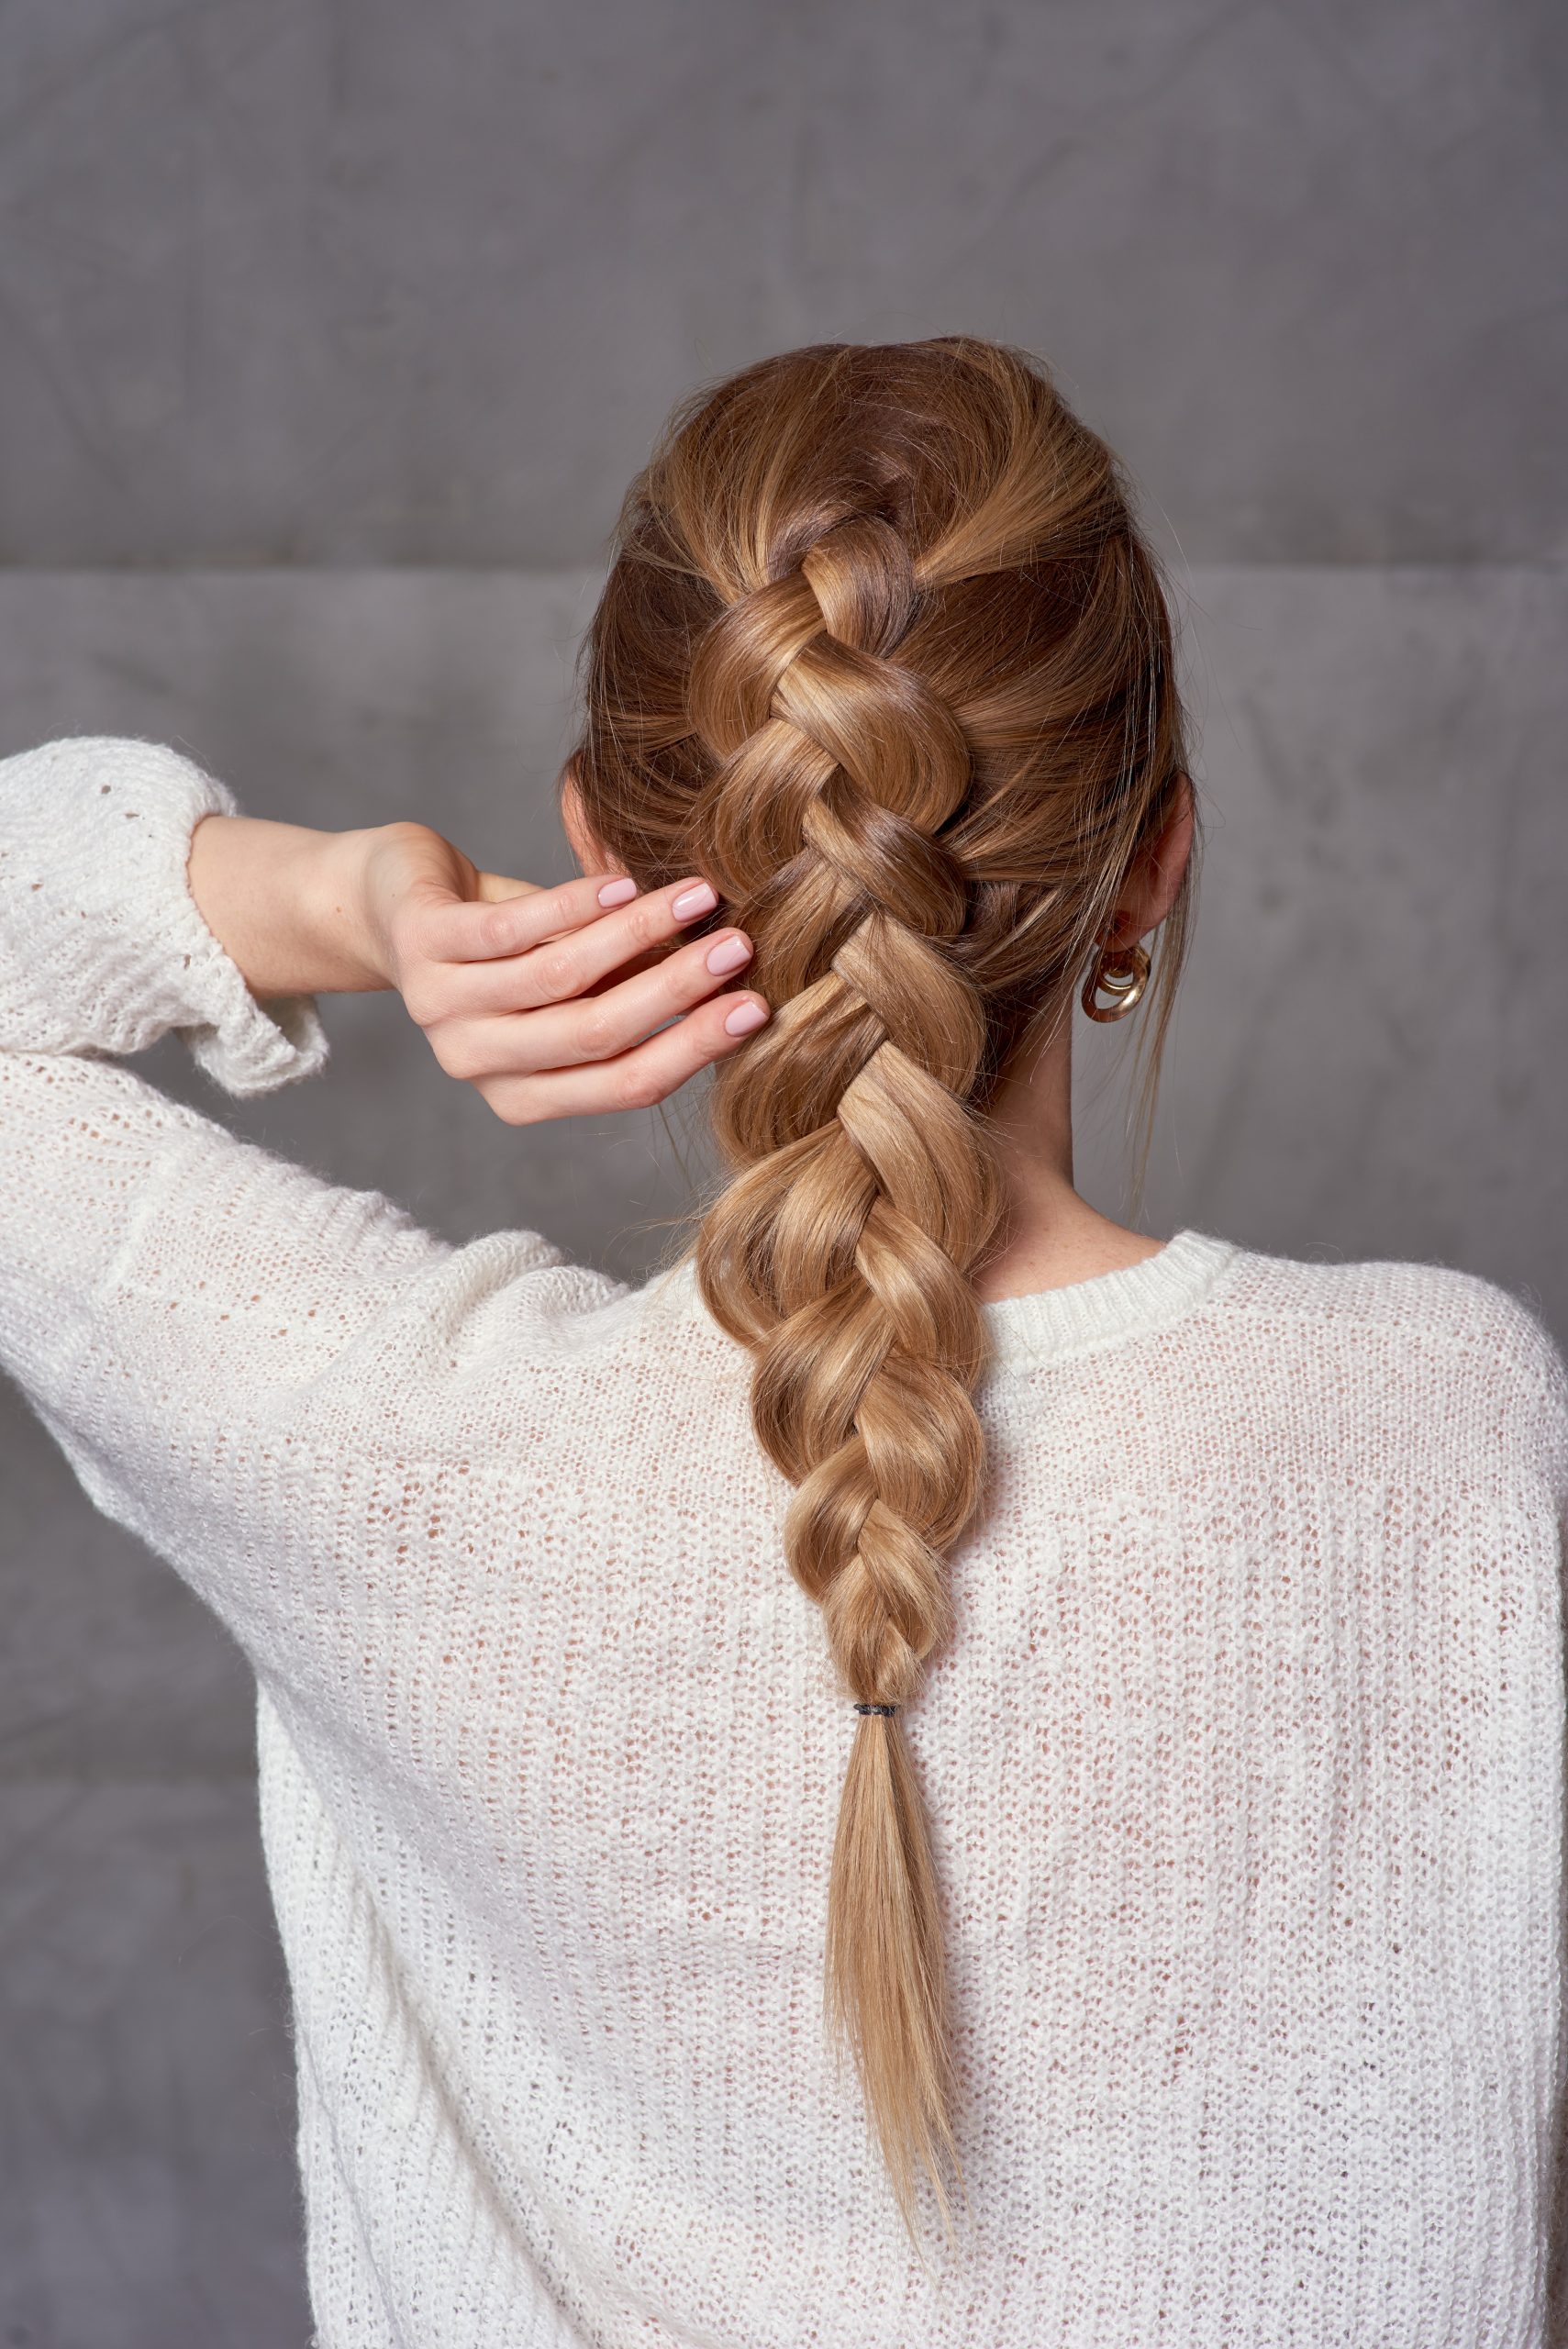 How To French Braid Your Own Hair Step By Step – Hair For Beginners